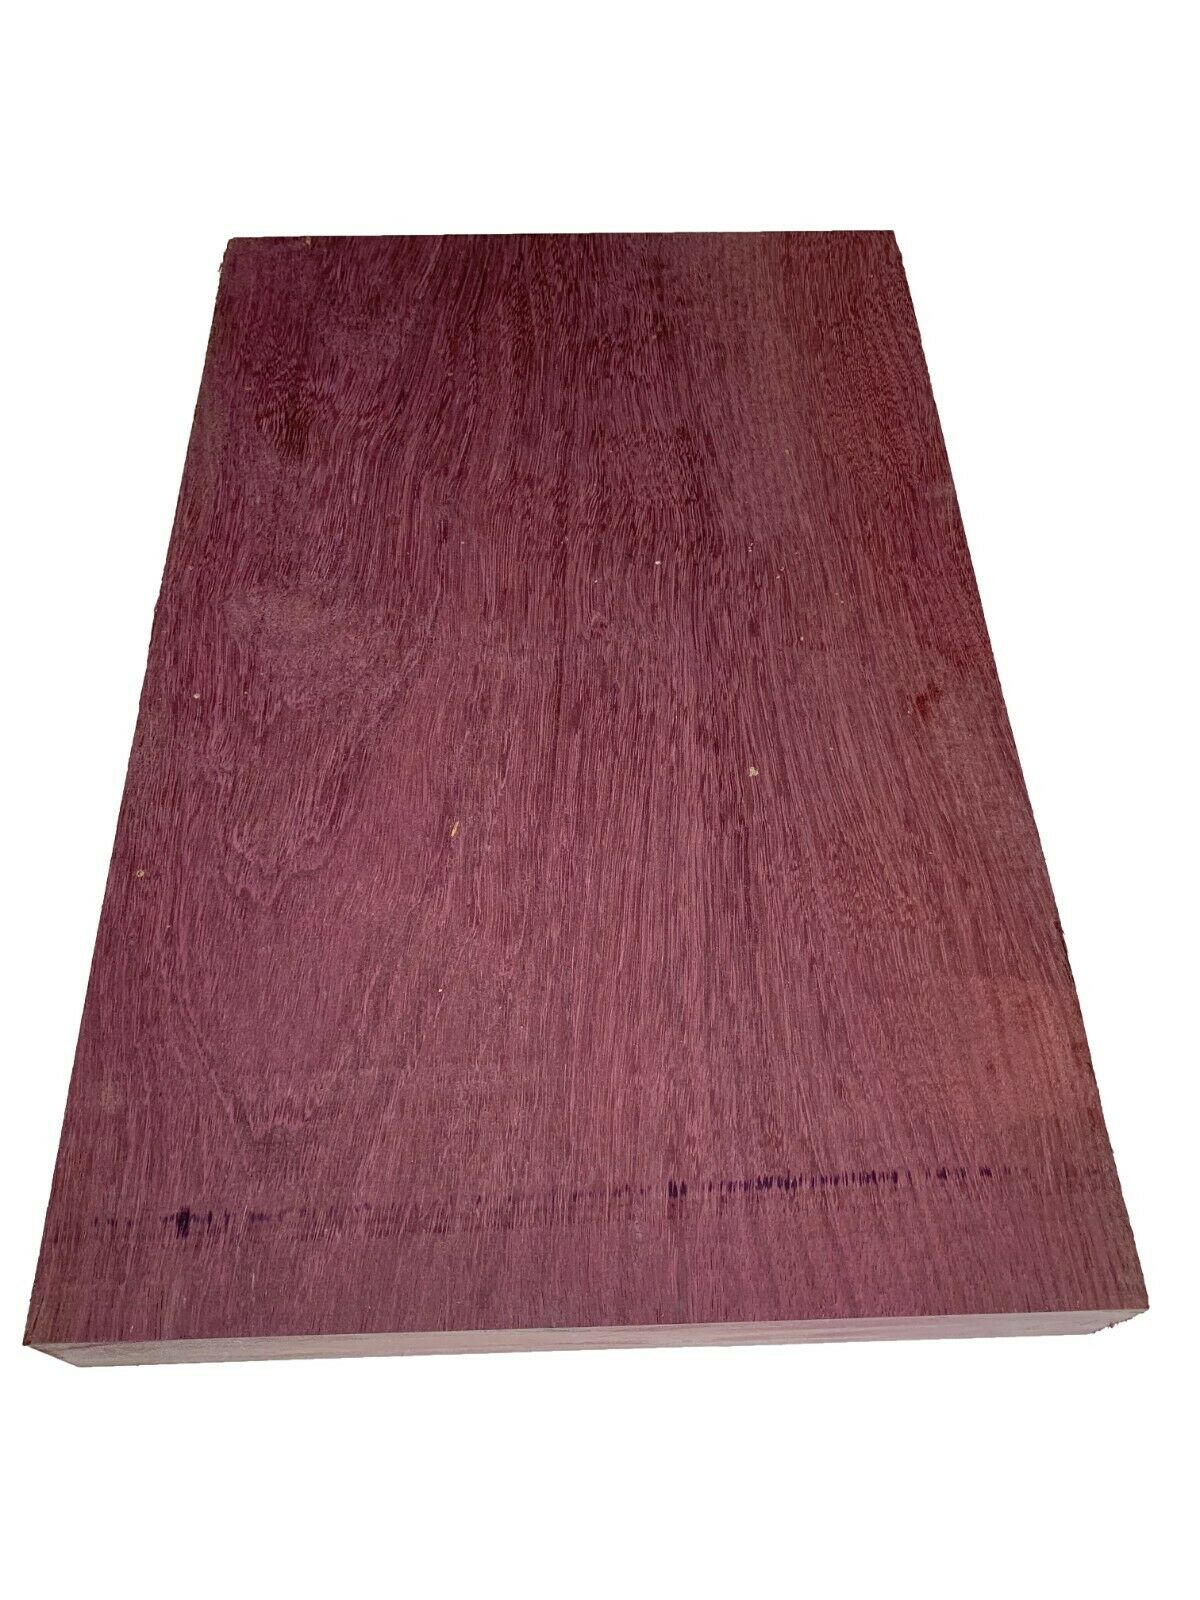 Purpleheart Guitar Body Blanks- Single Piece Solid Body, 21&quot; x 14&quot; x 2&quot; - Exotic Wood Zone - Buy online Across USA 